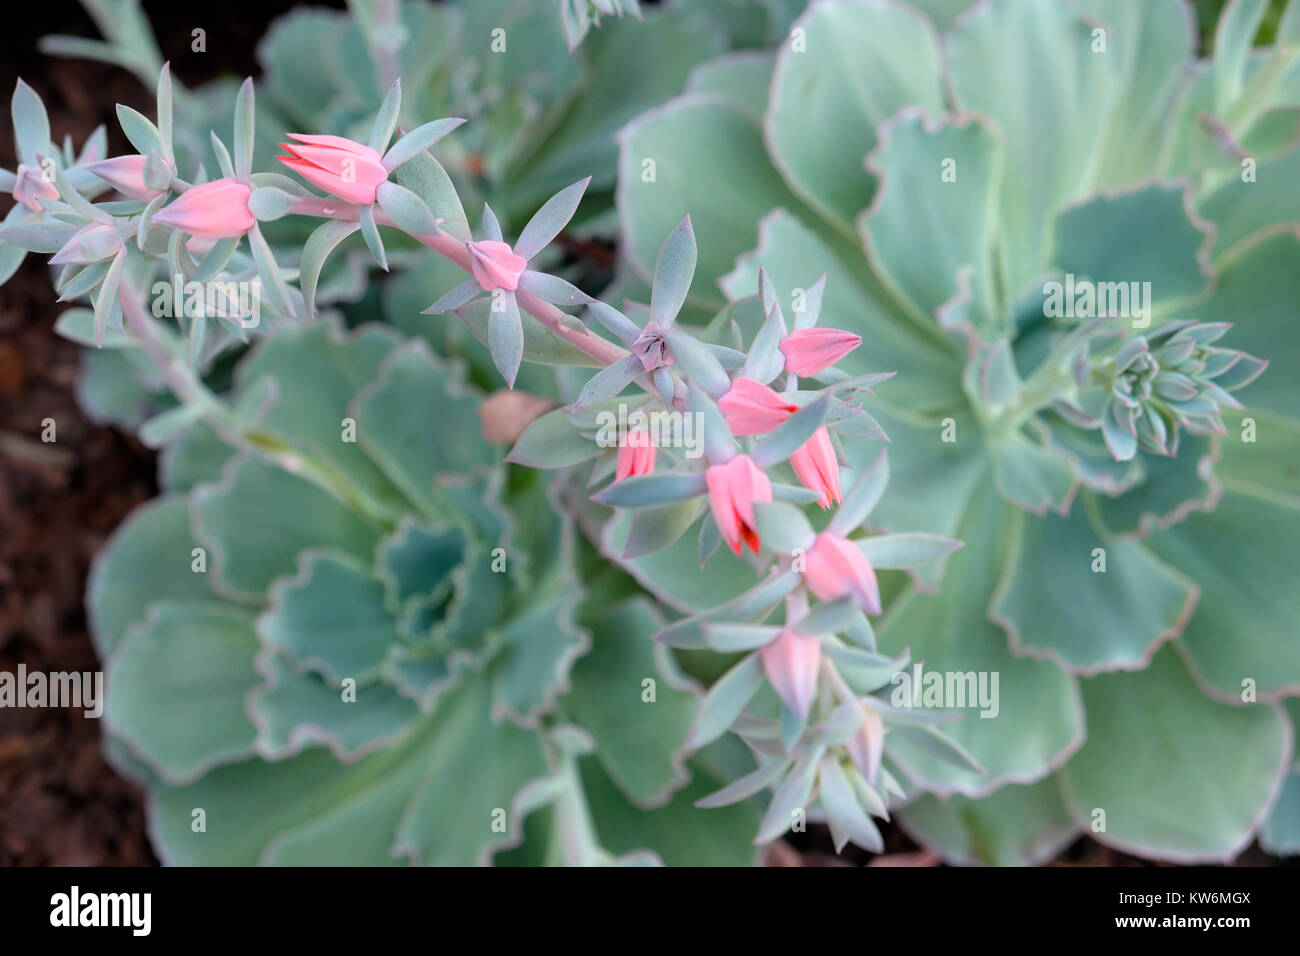 Echeveria Curly Locks drought resistant grey leaved plant in flower with pink flowers growing in a garden Los Angeles, LA California USA  KATHY DEWITT Stock Photo